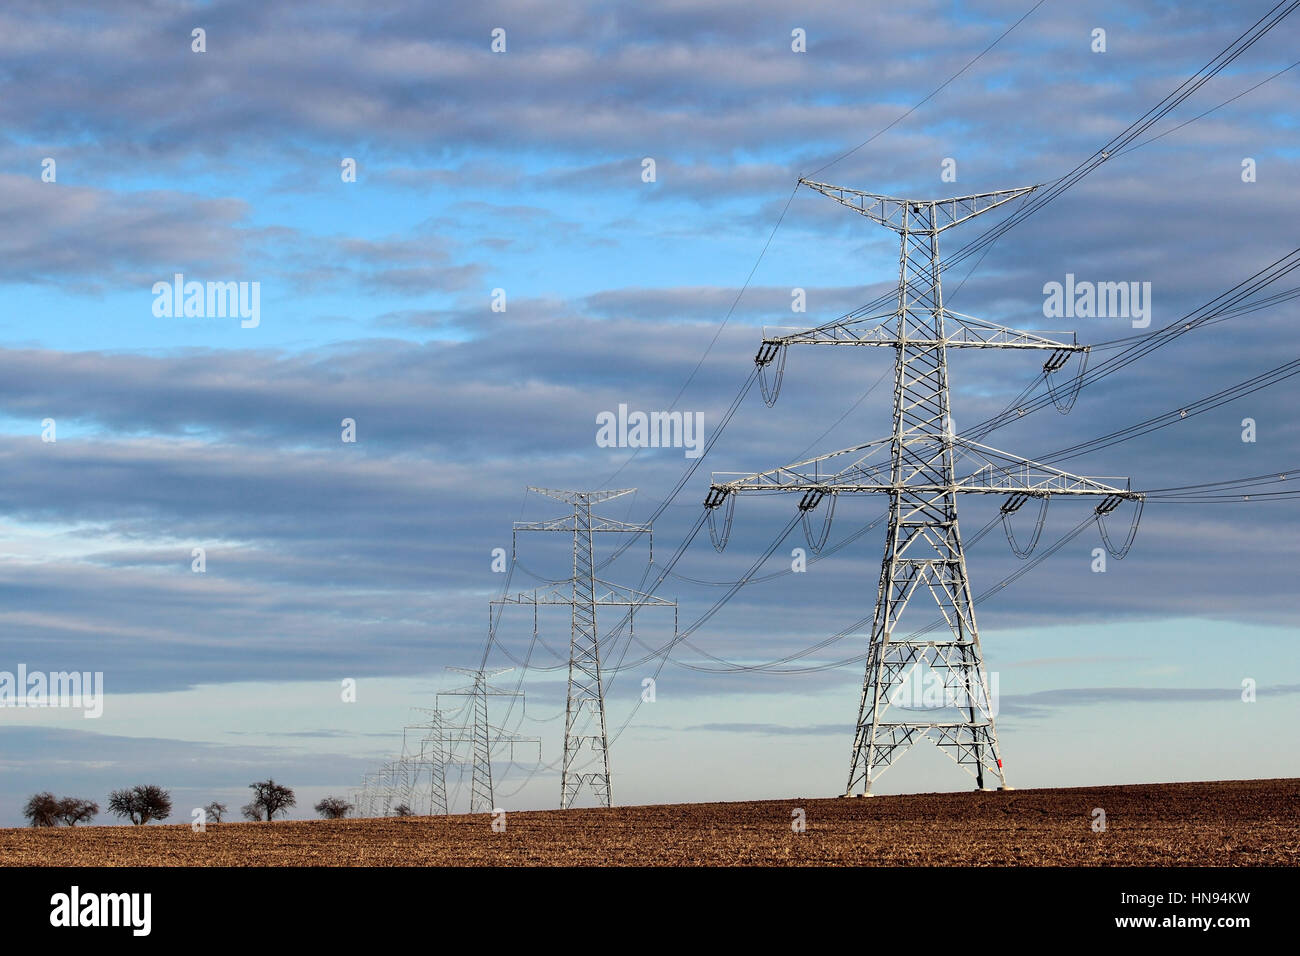 high voltage electric transmission pylon on agriculture field Stock Photo